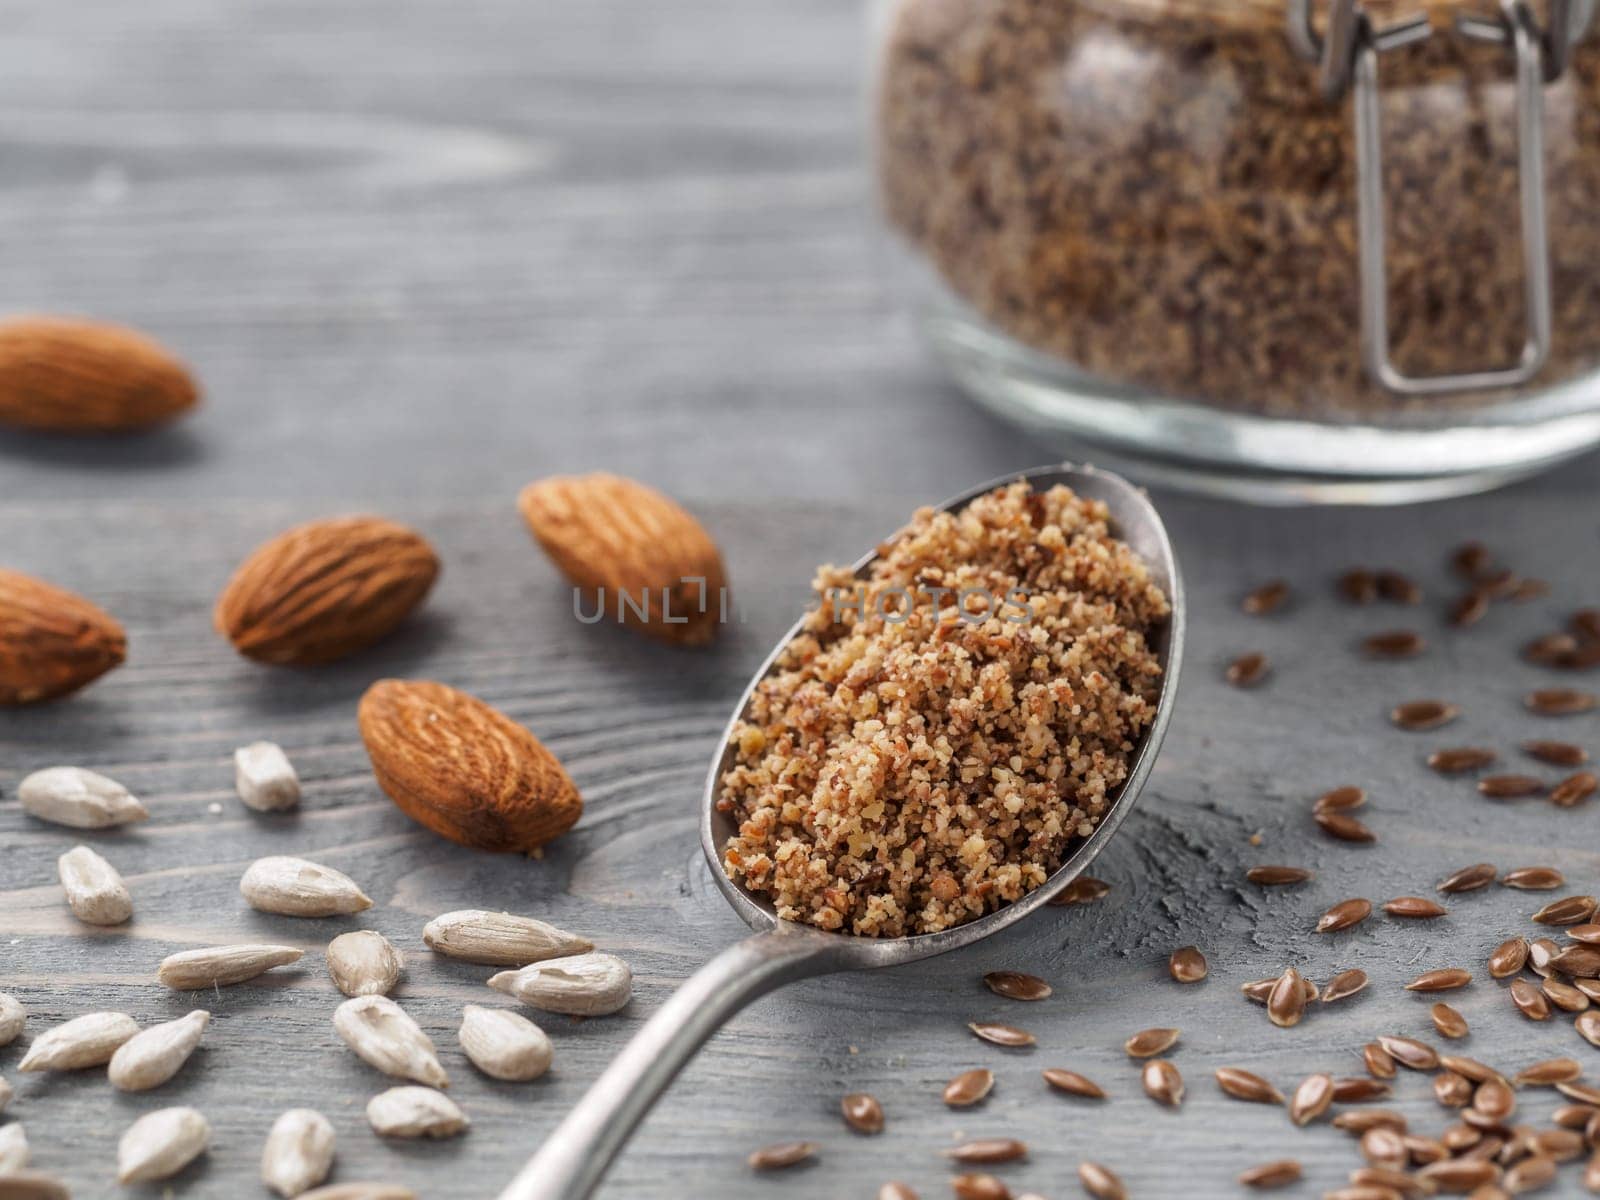 Homemade LSA mix in spoon - Linseed or flax seeds, Sunflower seeds and Almonds. Traditional Australian blend of ground, source of dietary fiber, protein, omega fatty acids. Copy space for text.